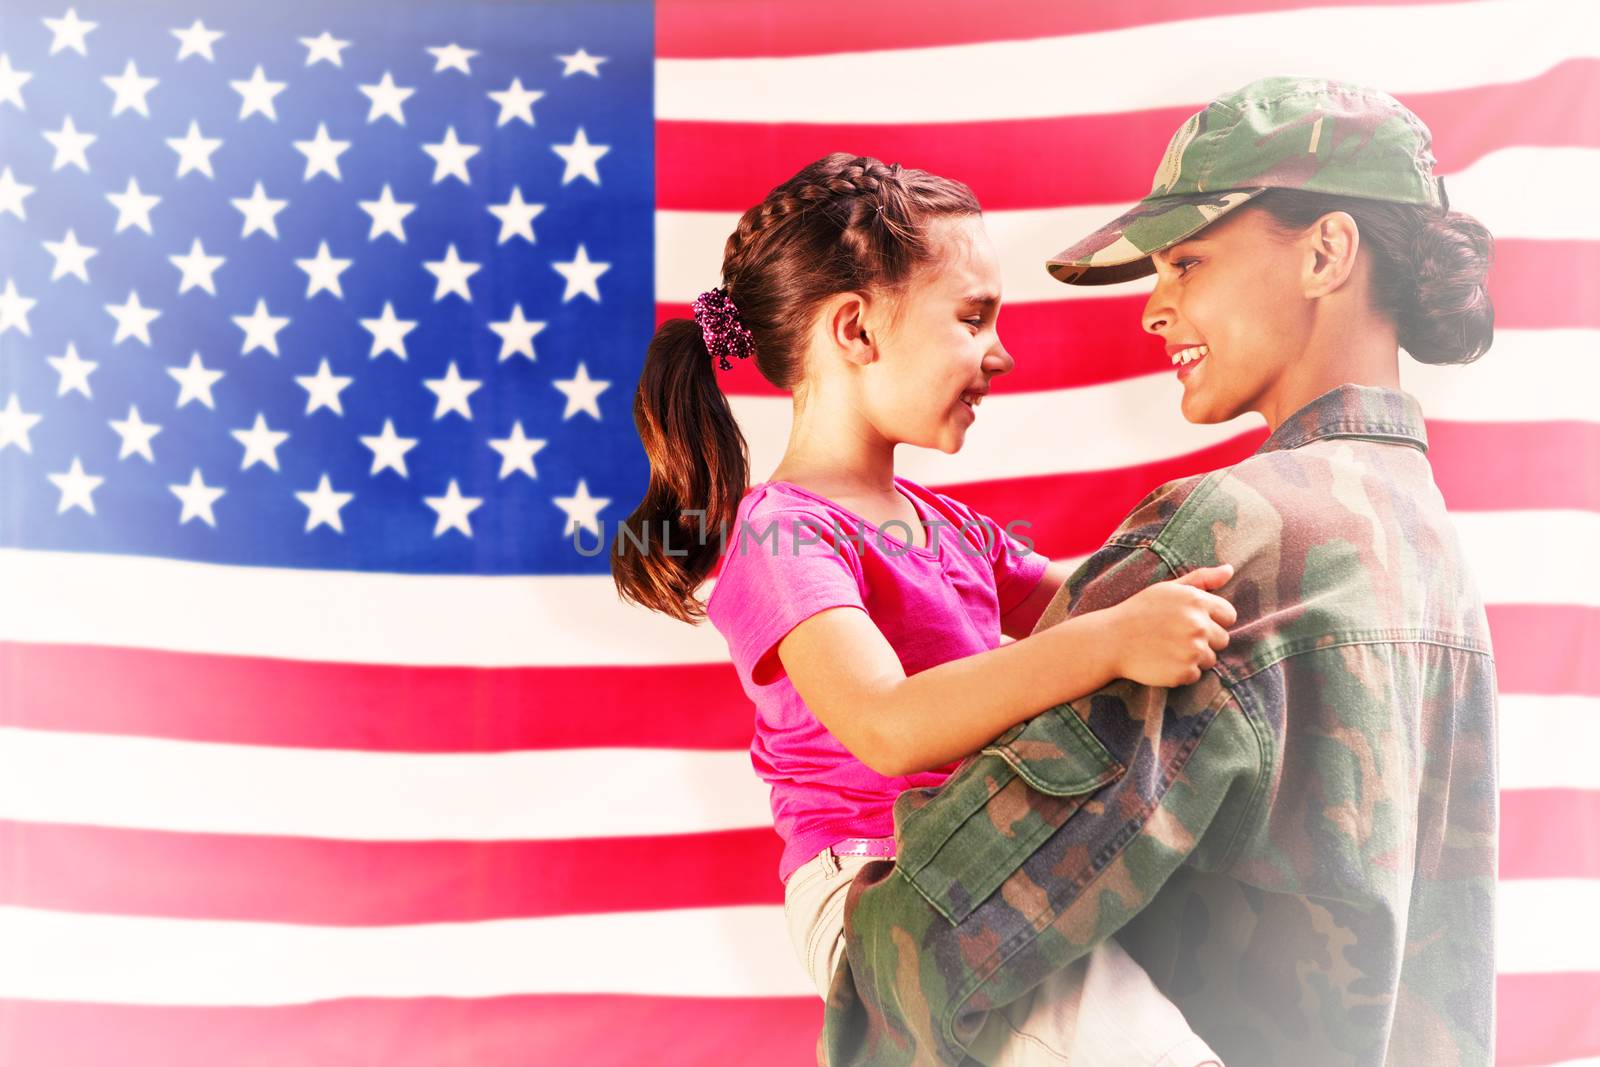 Solider reunited with daughter against rippled us flag